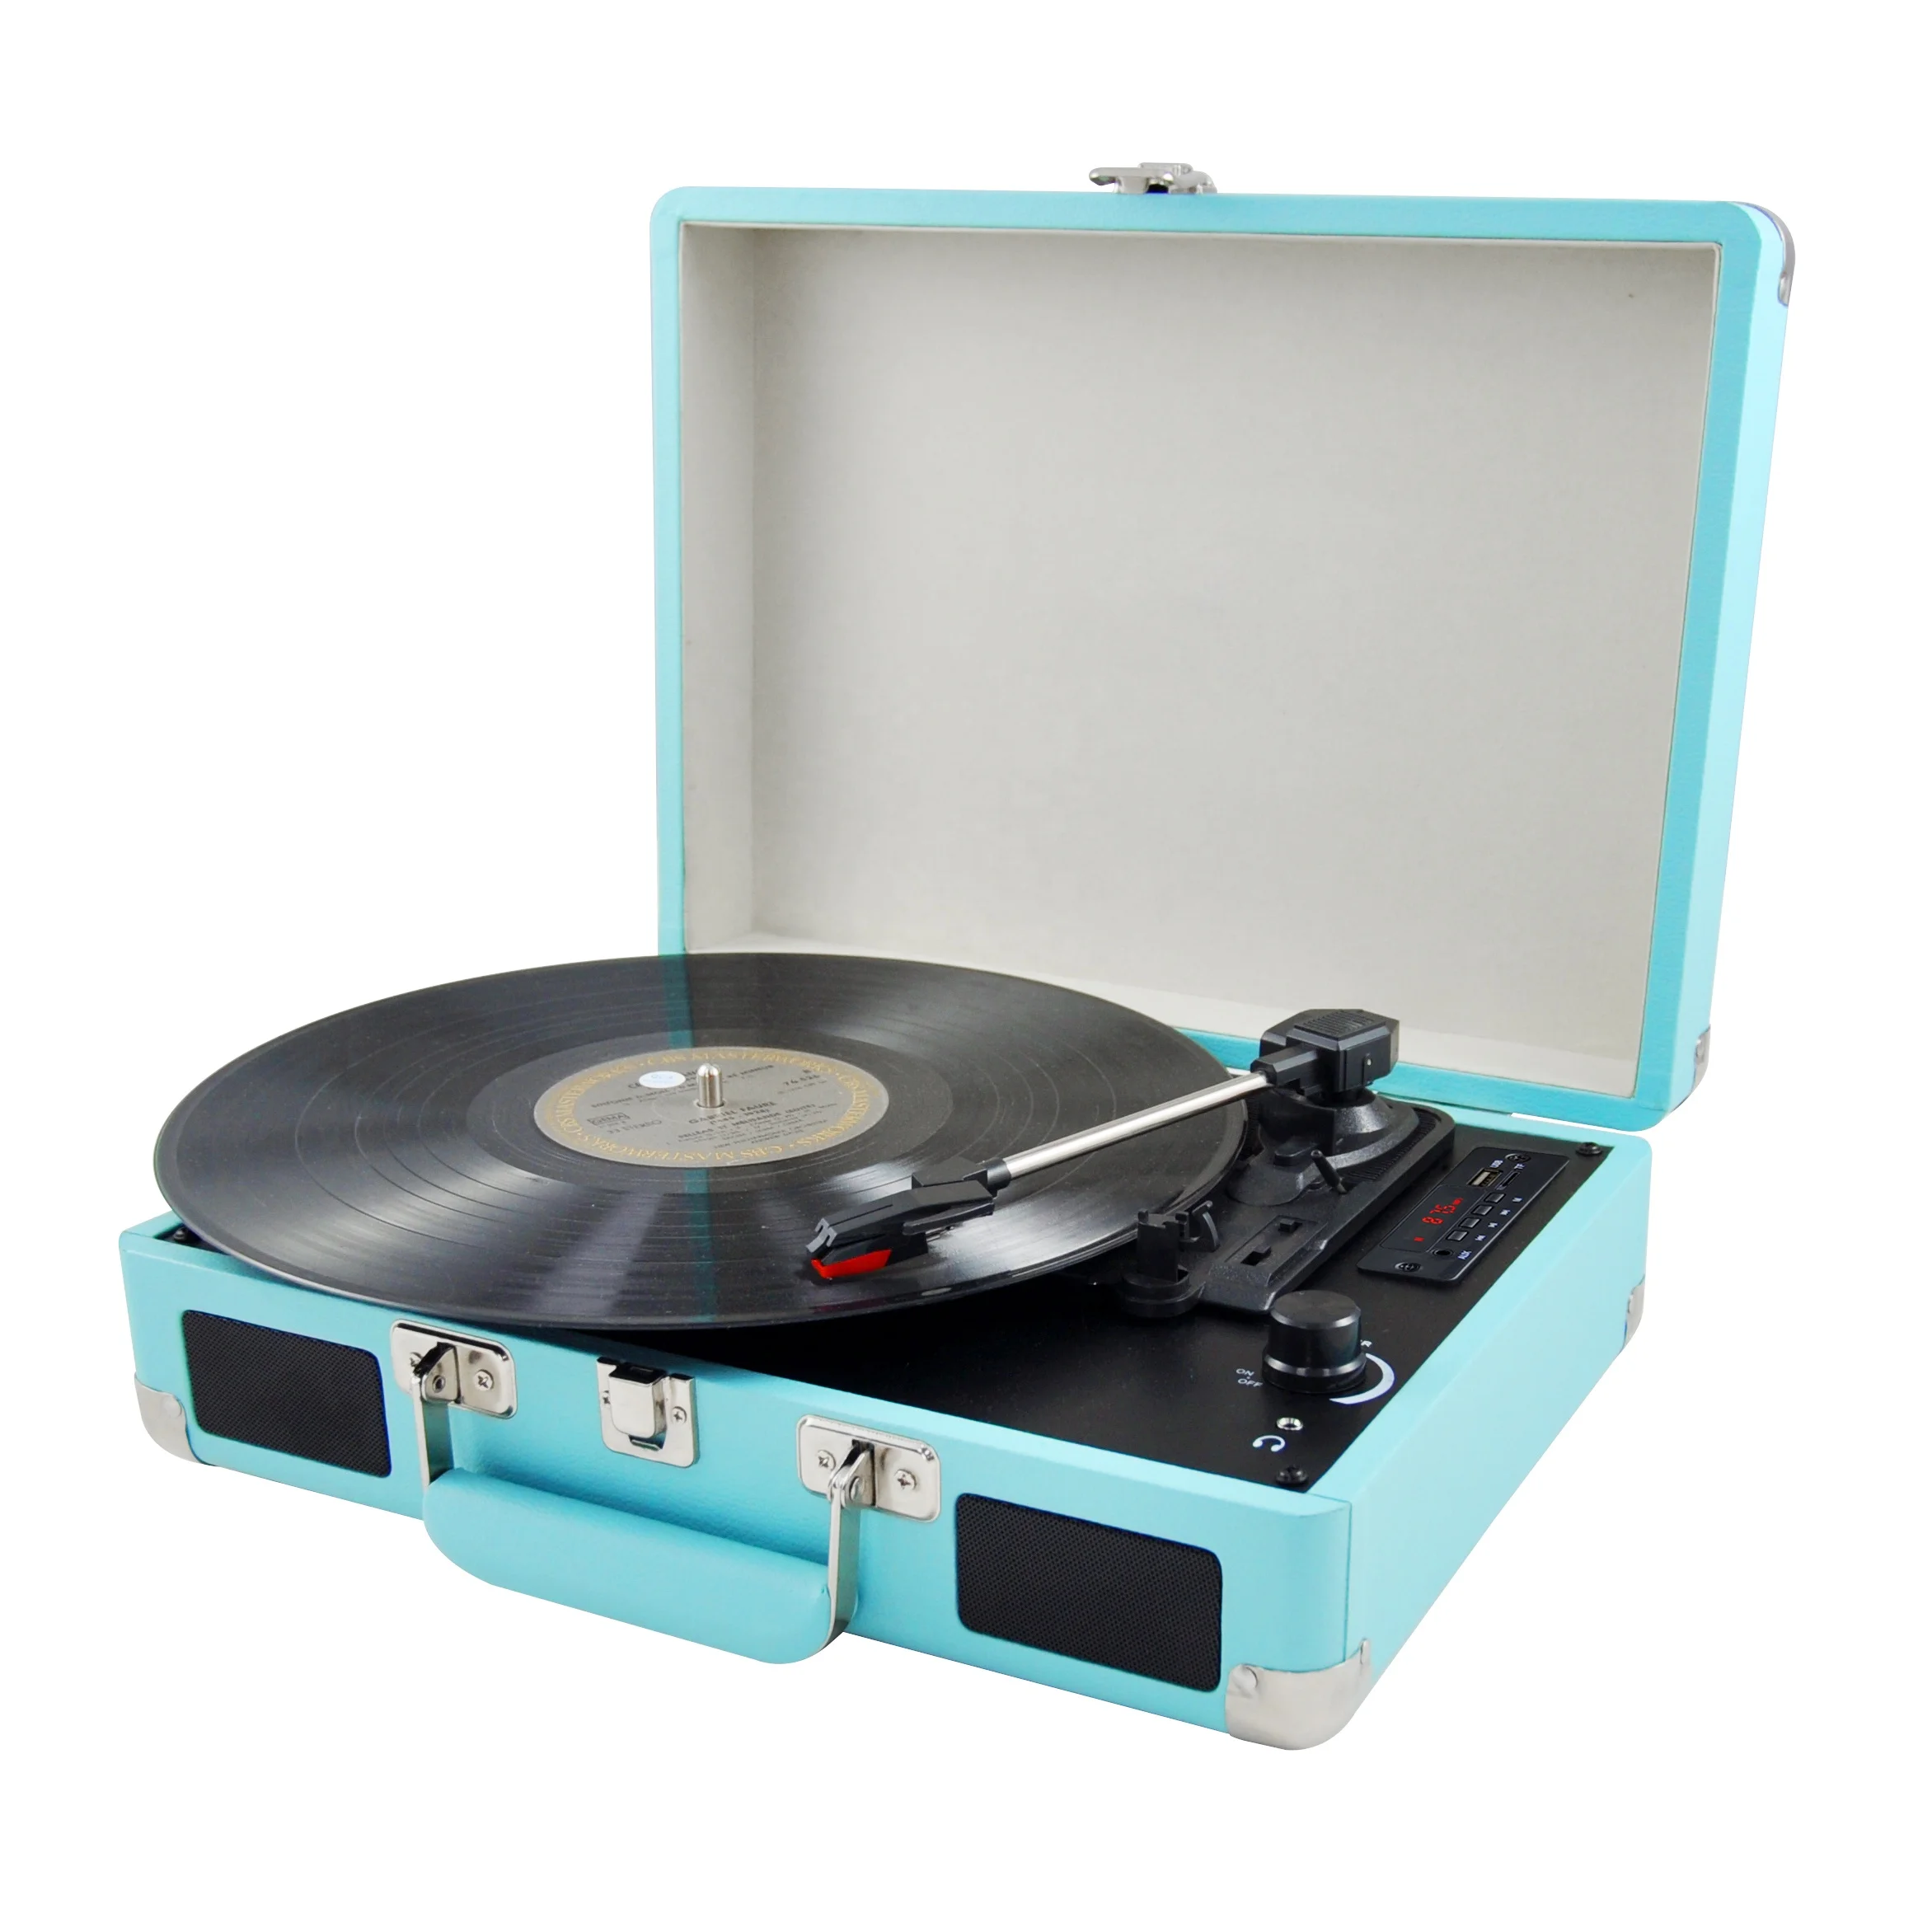 33 rpm record players